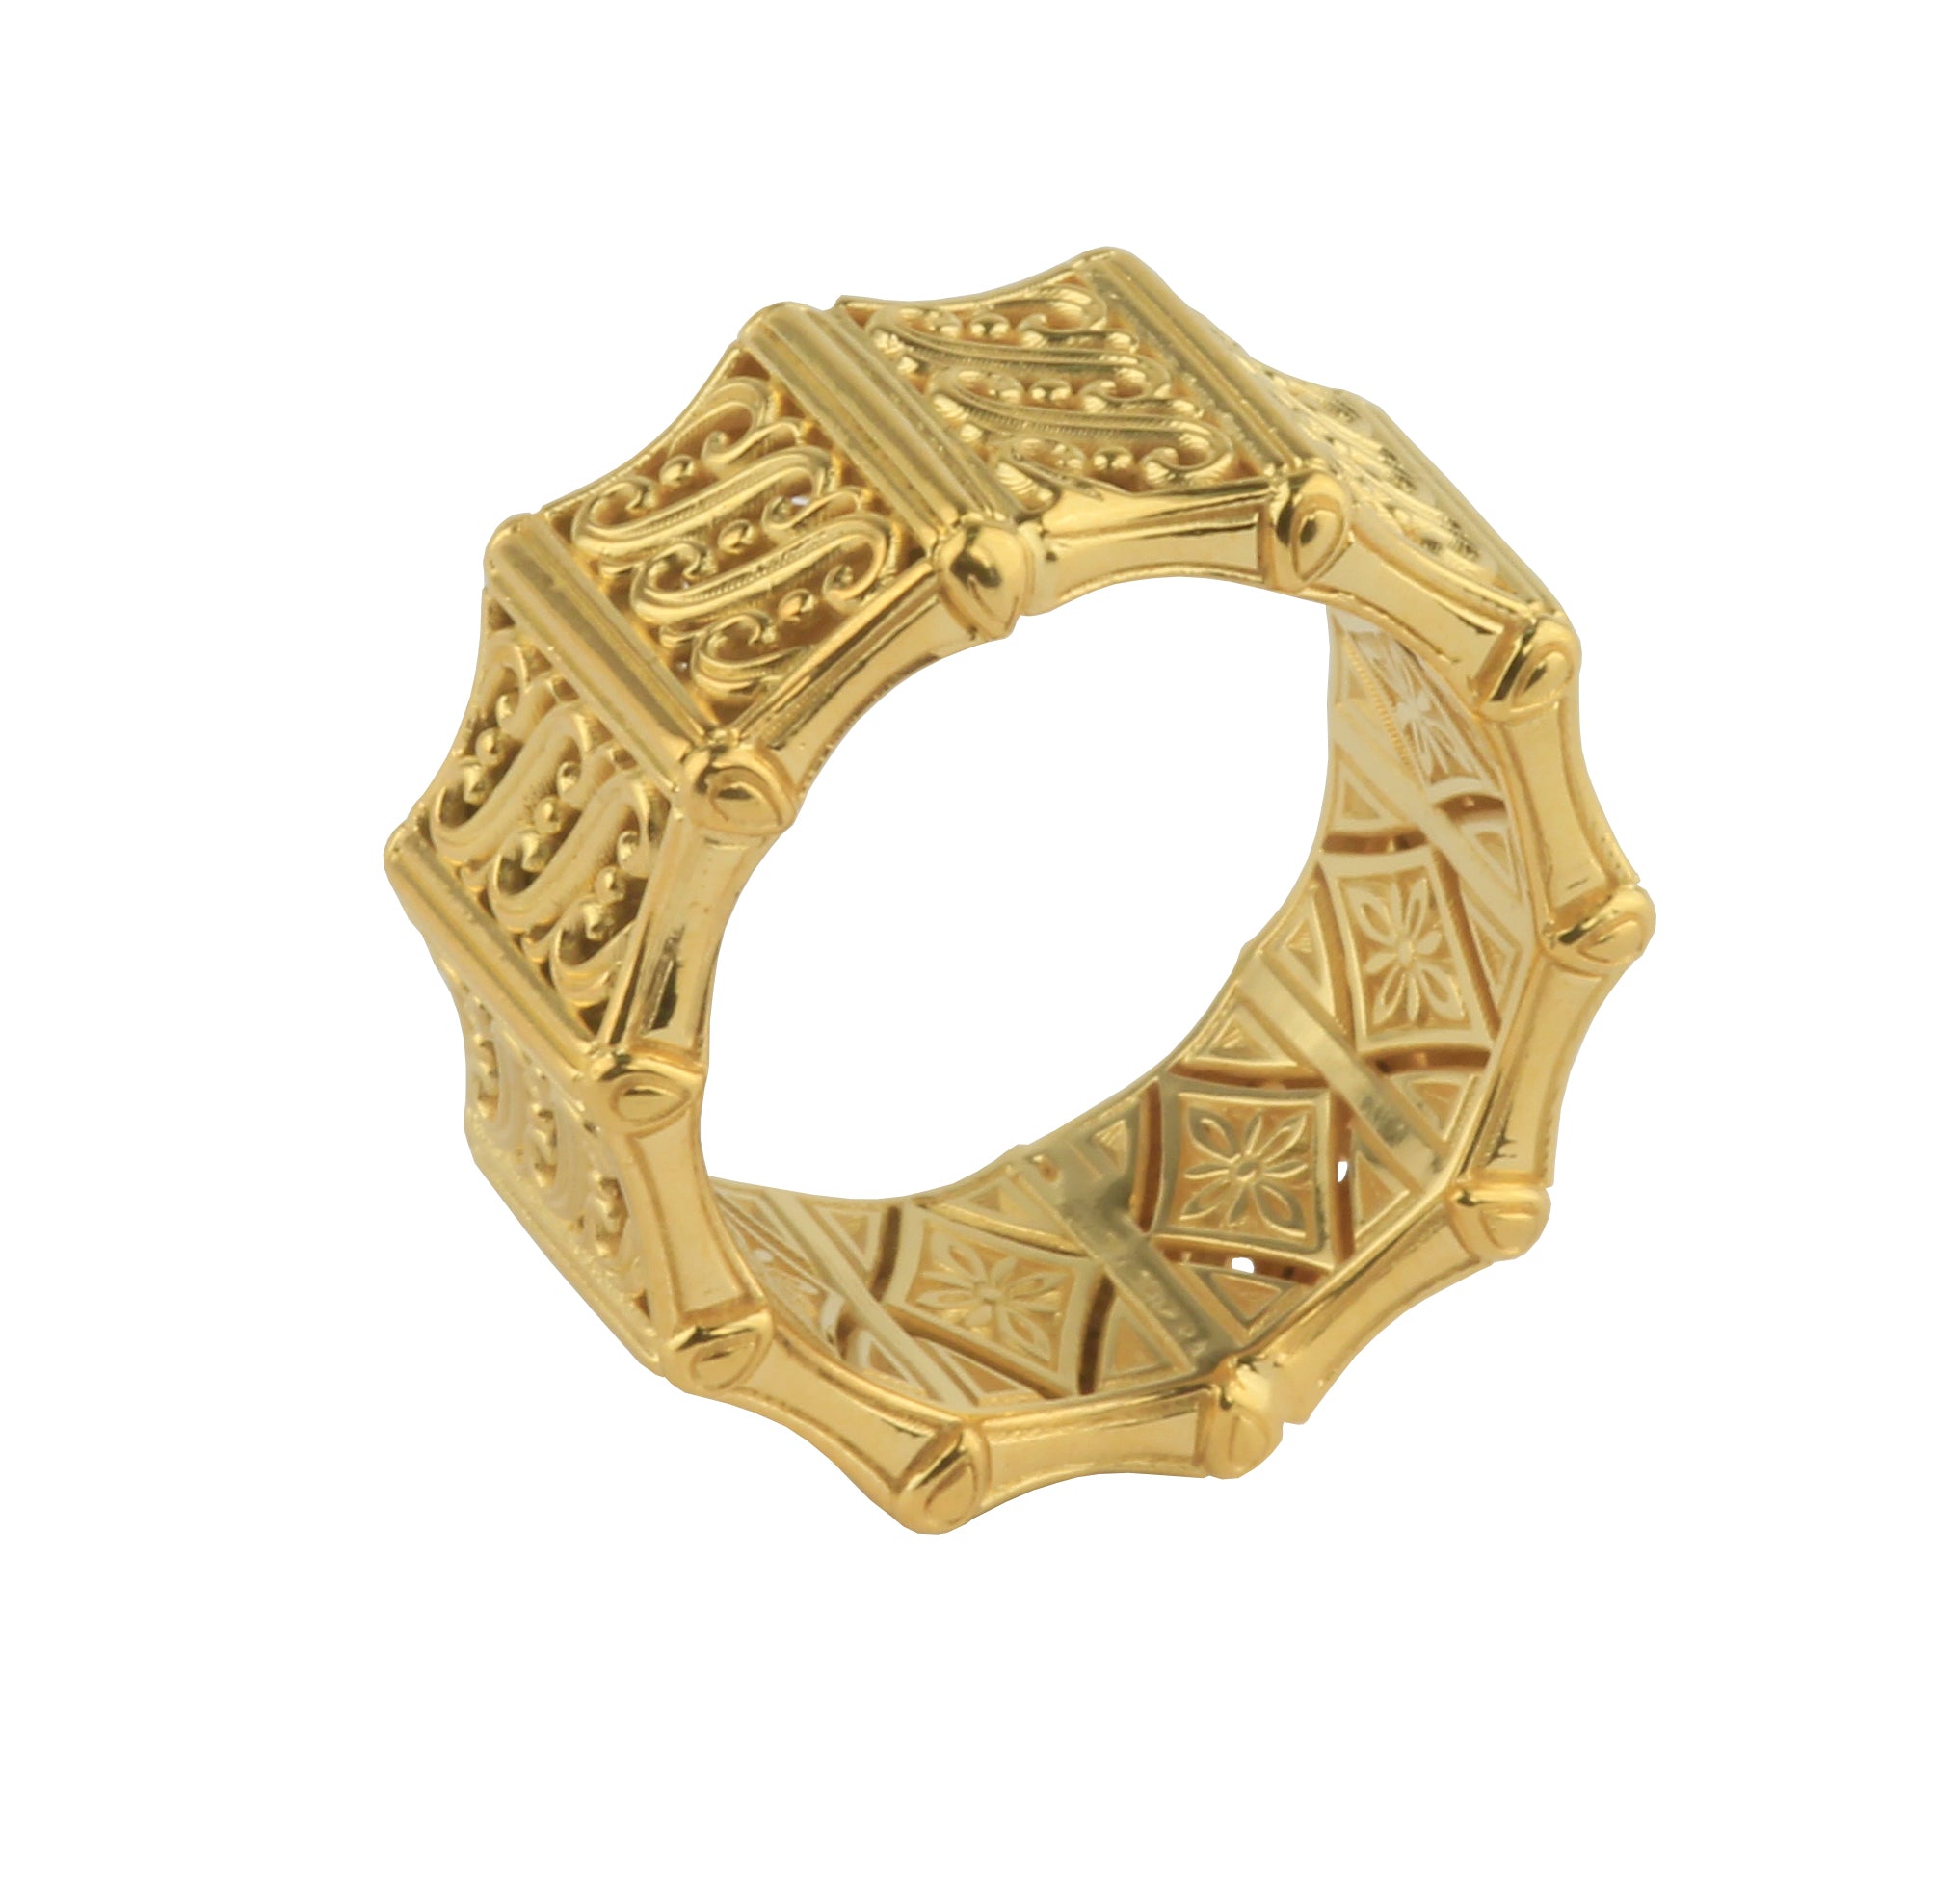 KONSTANTINO 18KT GOLD (10.4GR +/-)  RING FROM THE FLAMENCO GOLD  COLLECTION